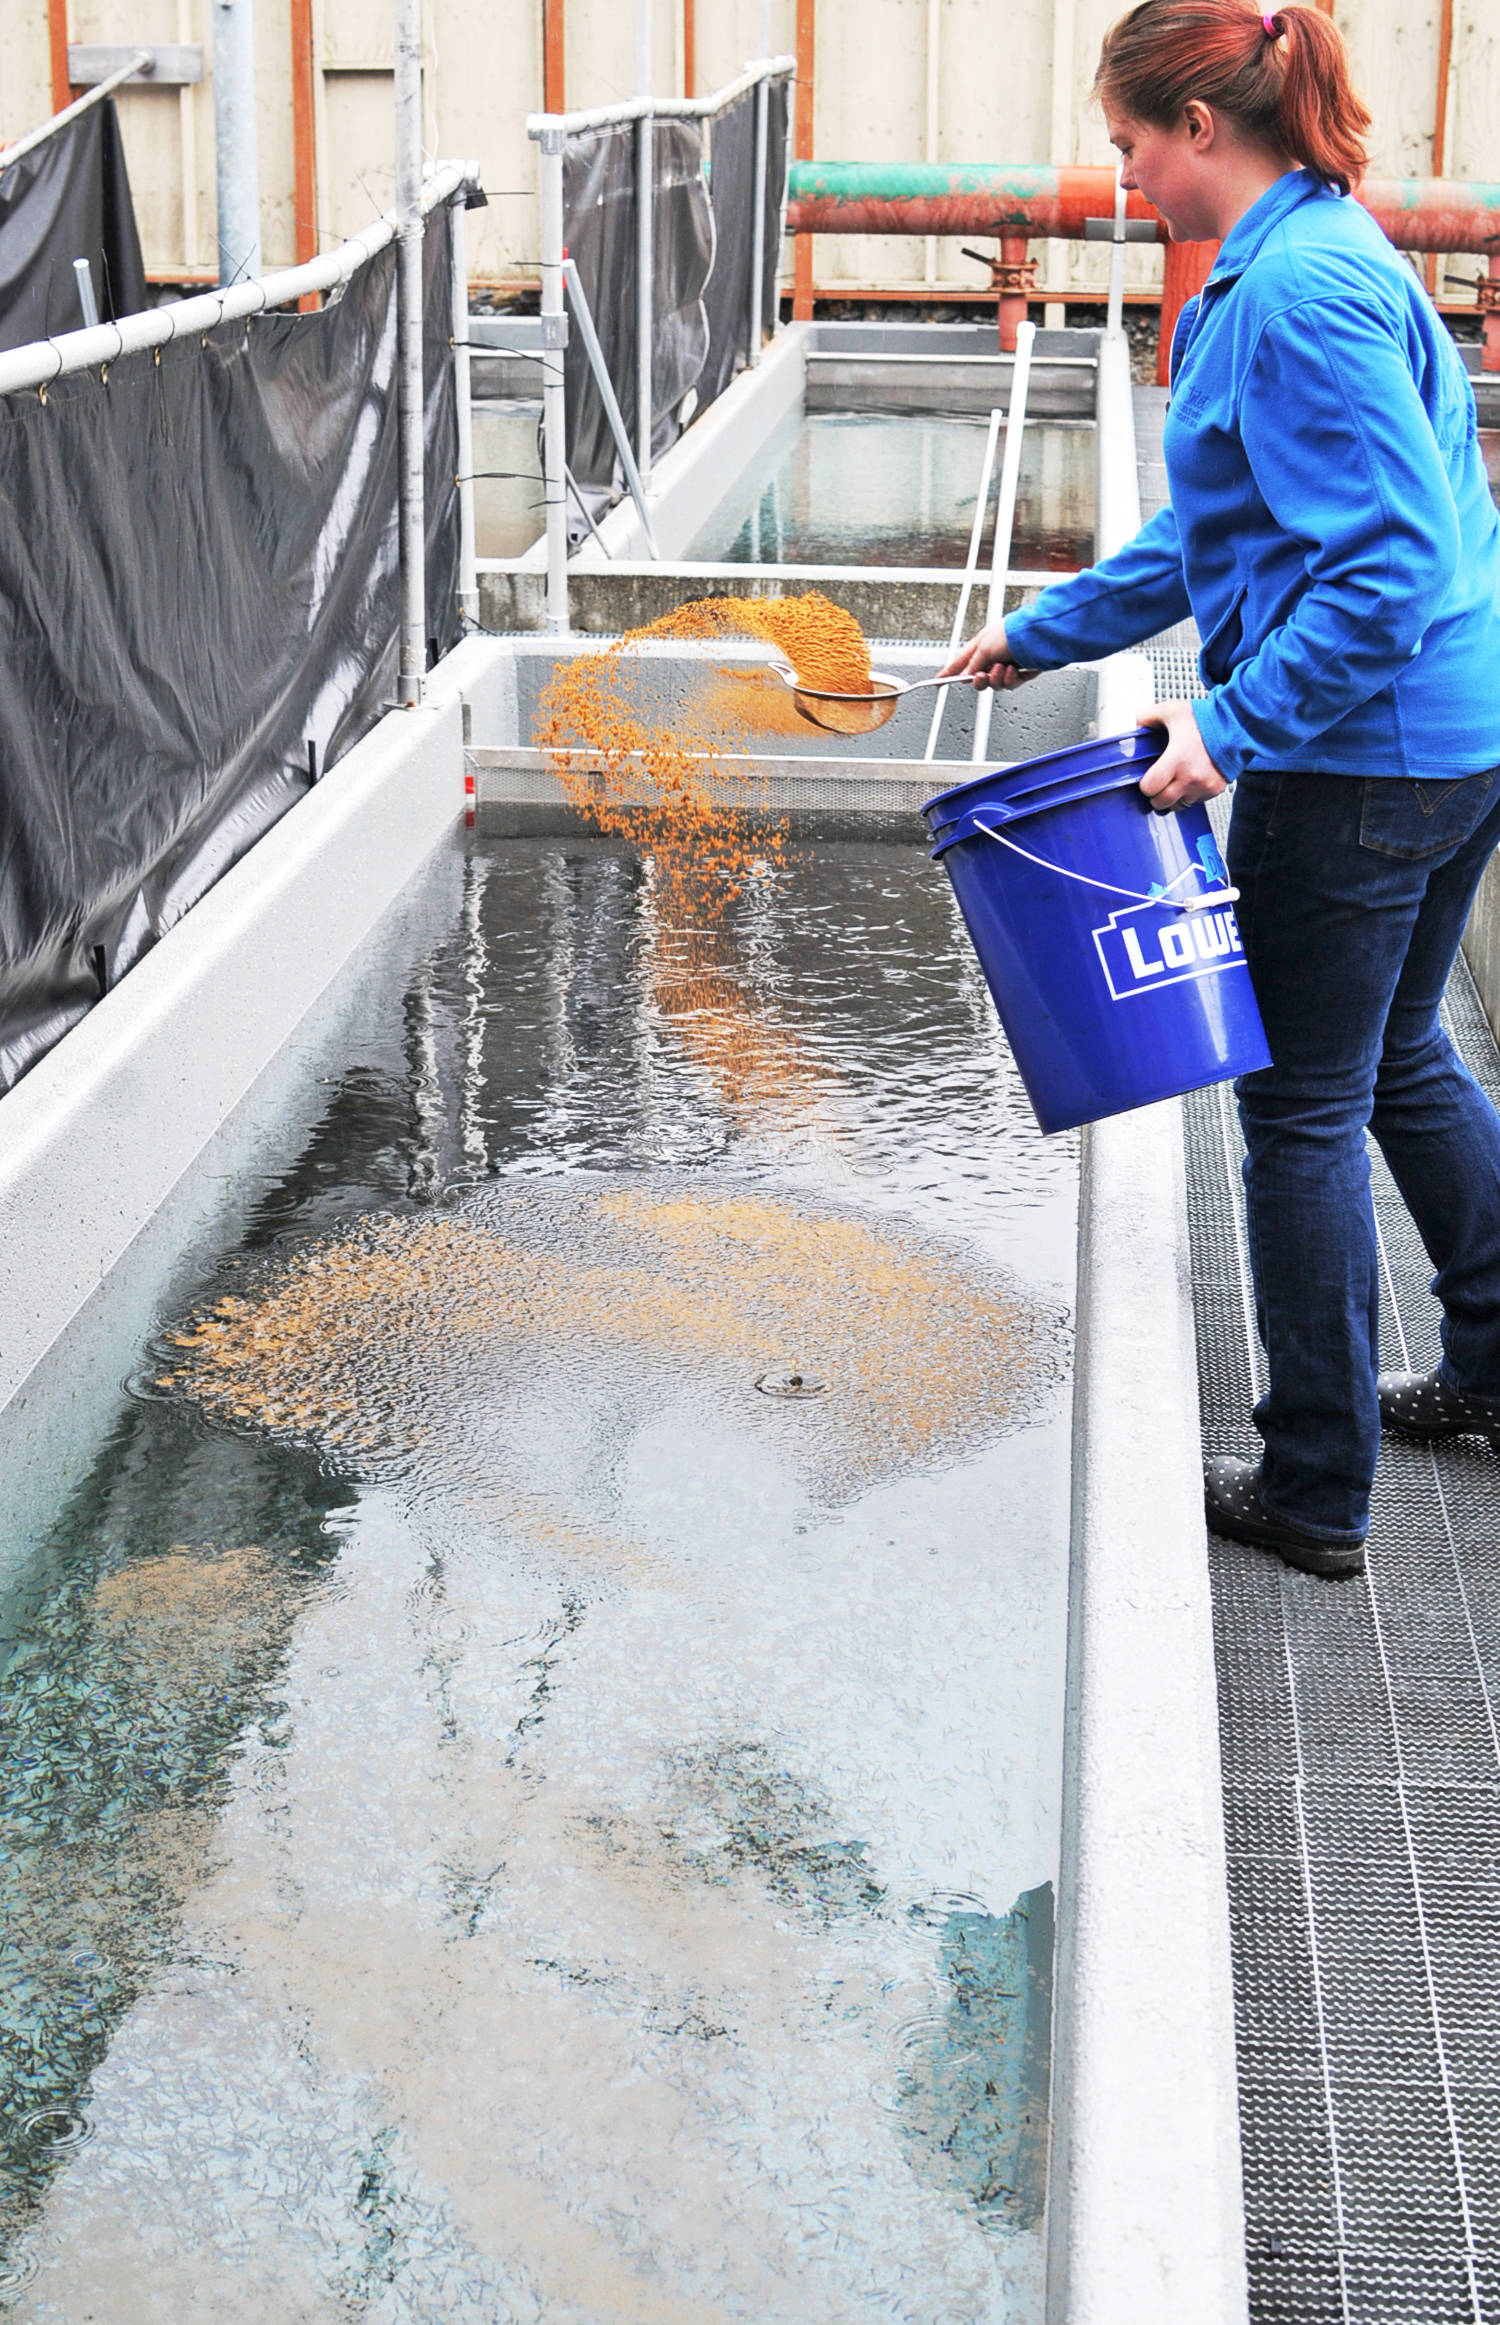 Trail Lakes Hatchery Manager Kristin Bates feeds sockeye salmon fry in a raceway at Cook Inlet Aquaculture Association’s Trail Lakes Hatchery on Friday, April 20, 2018 near Moose Pass, Alaska. Pacific salmon raised in hatcheries are usually exposed to predetermined sets of hot and cold water cycles before they hatch, leading to dark and light rings on their inner ear bone, called an otolith, that biologists can later read to track where the salmon came from when it returns as an adult. Staff at Trail Lakes Hatchery raise all the association’s sockeye salmon, which are hatched, imprinted and distributed to the organization’s various operations across Cook Inlet, from China Poot Lake in Lower Cook Inlet to Shell Lake in the Matanuska-Susitna Valley. (Photo by Elizabeth Earl/Peninsula Clarion)